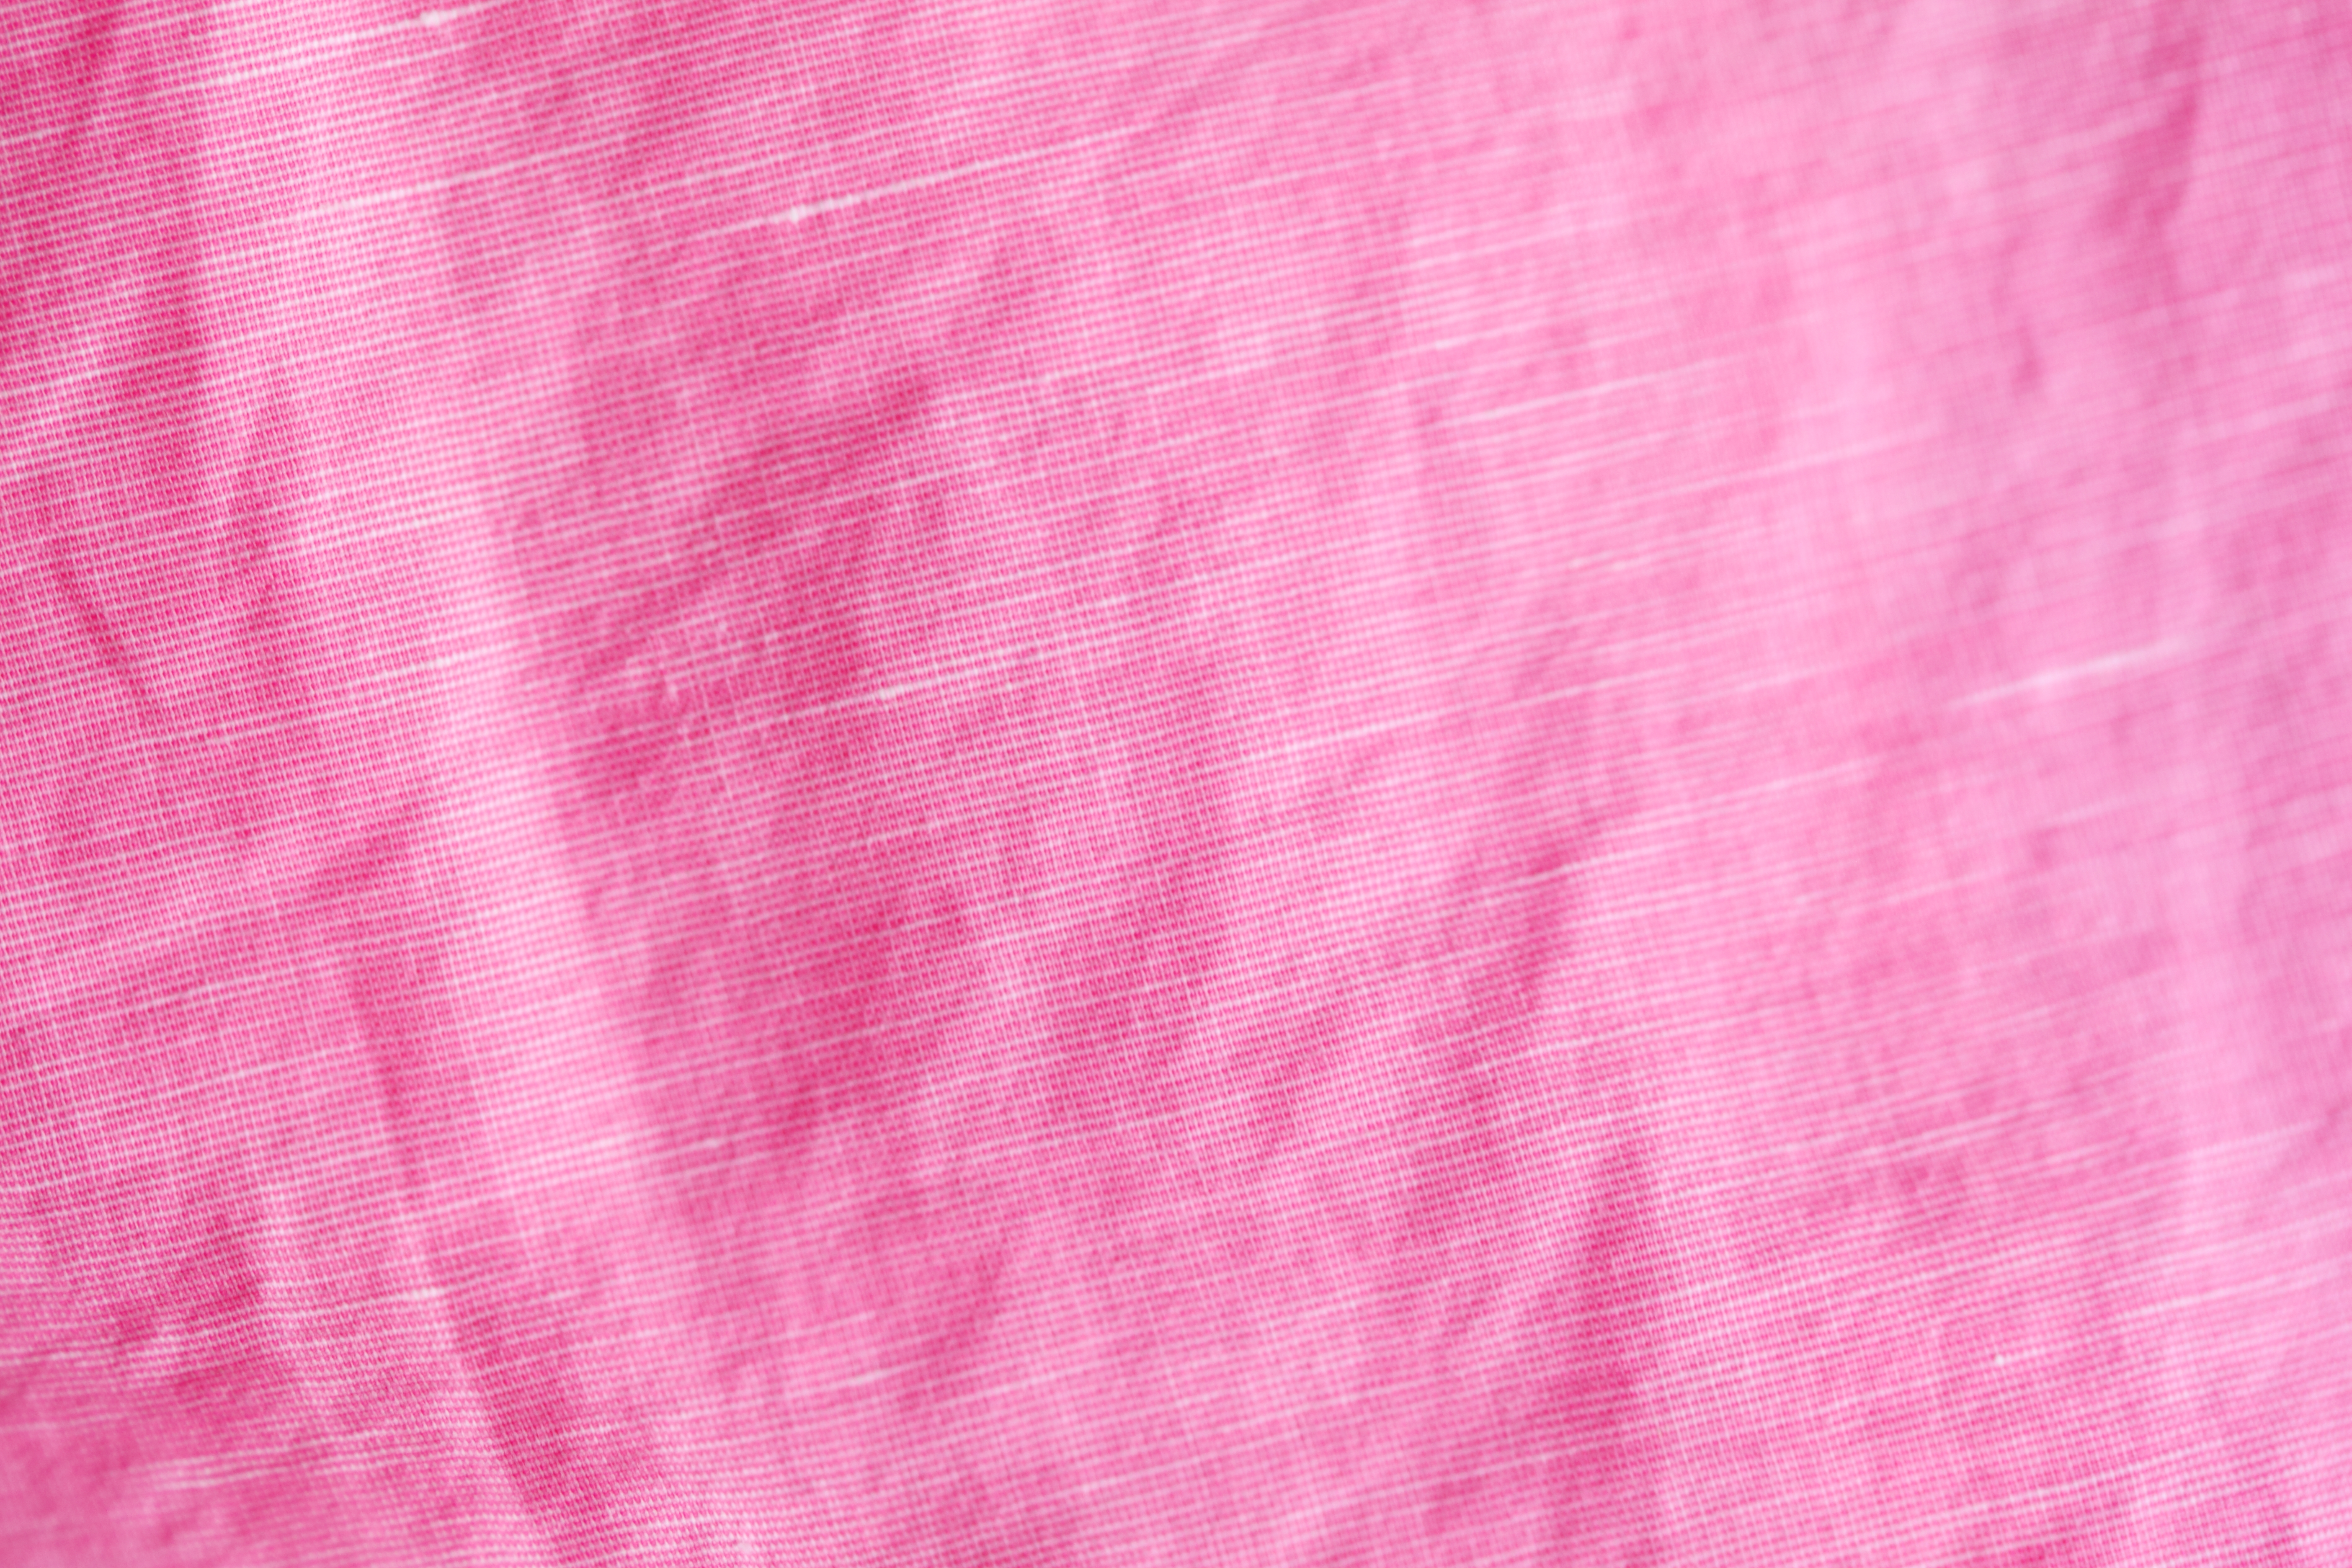 File:Pink Woven Cotton Silk Fabric Texture Free Creative Commons